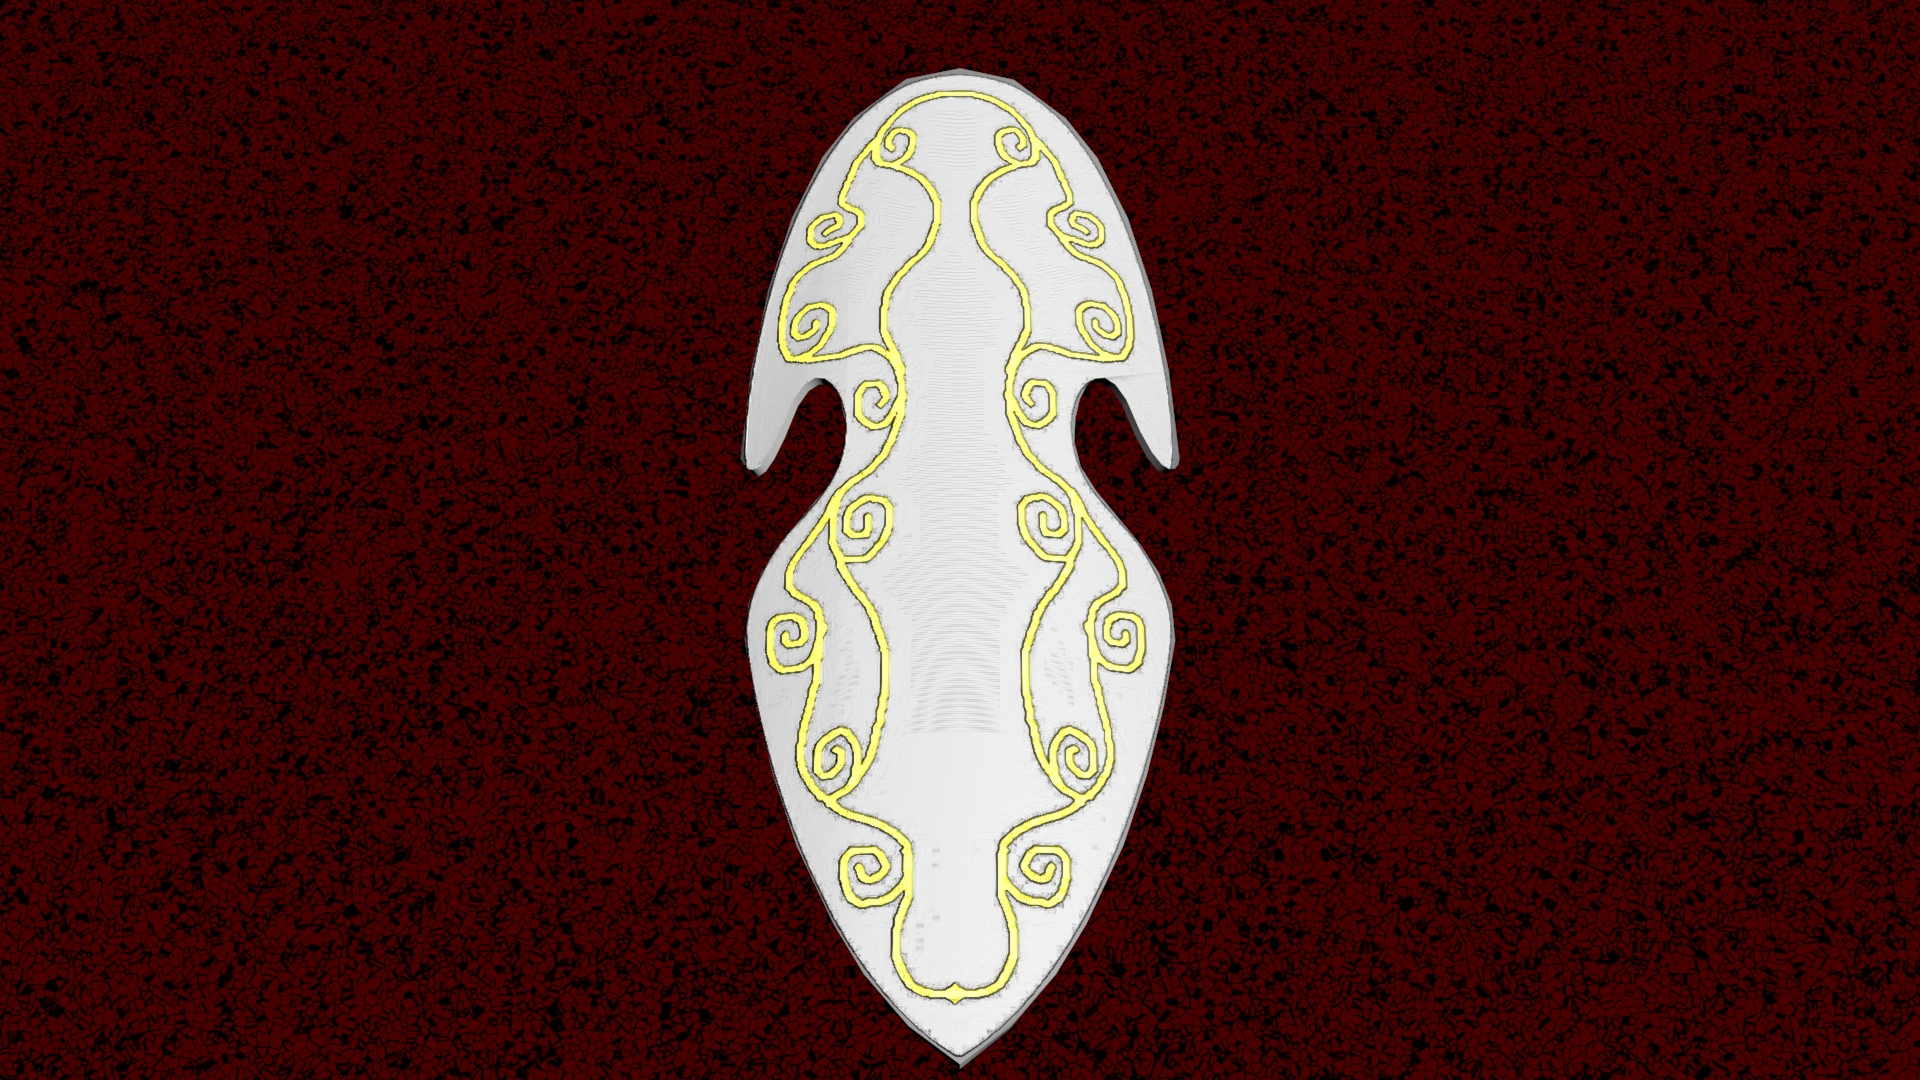 3D rendered shield with a swirling design on the front.